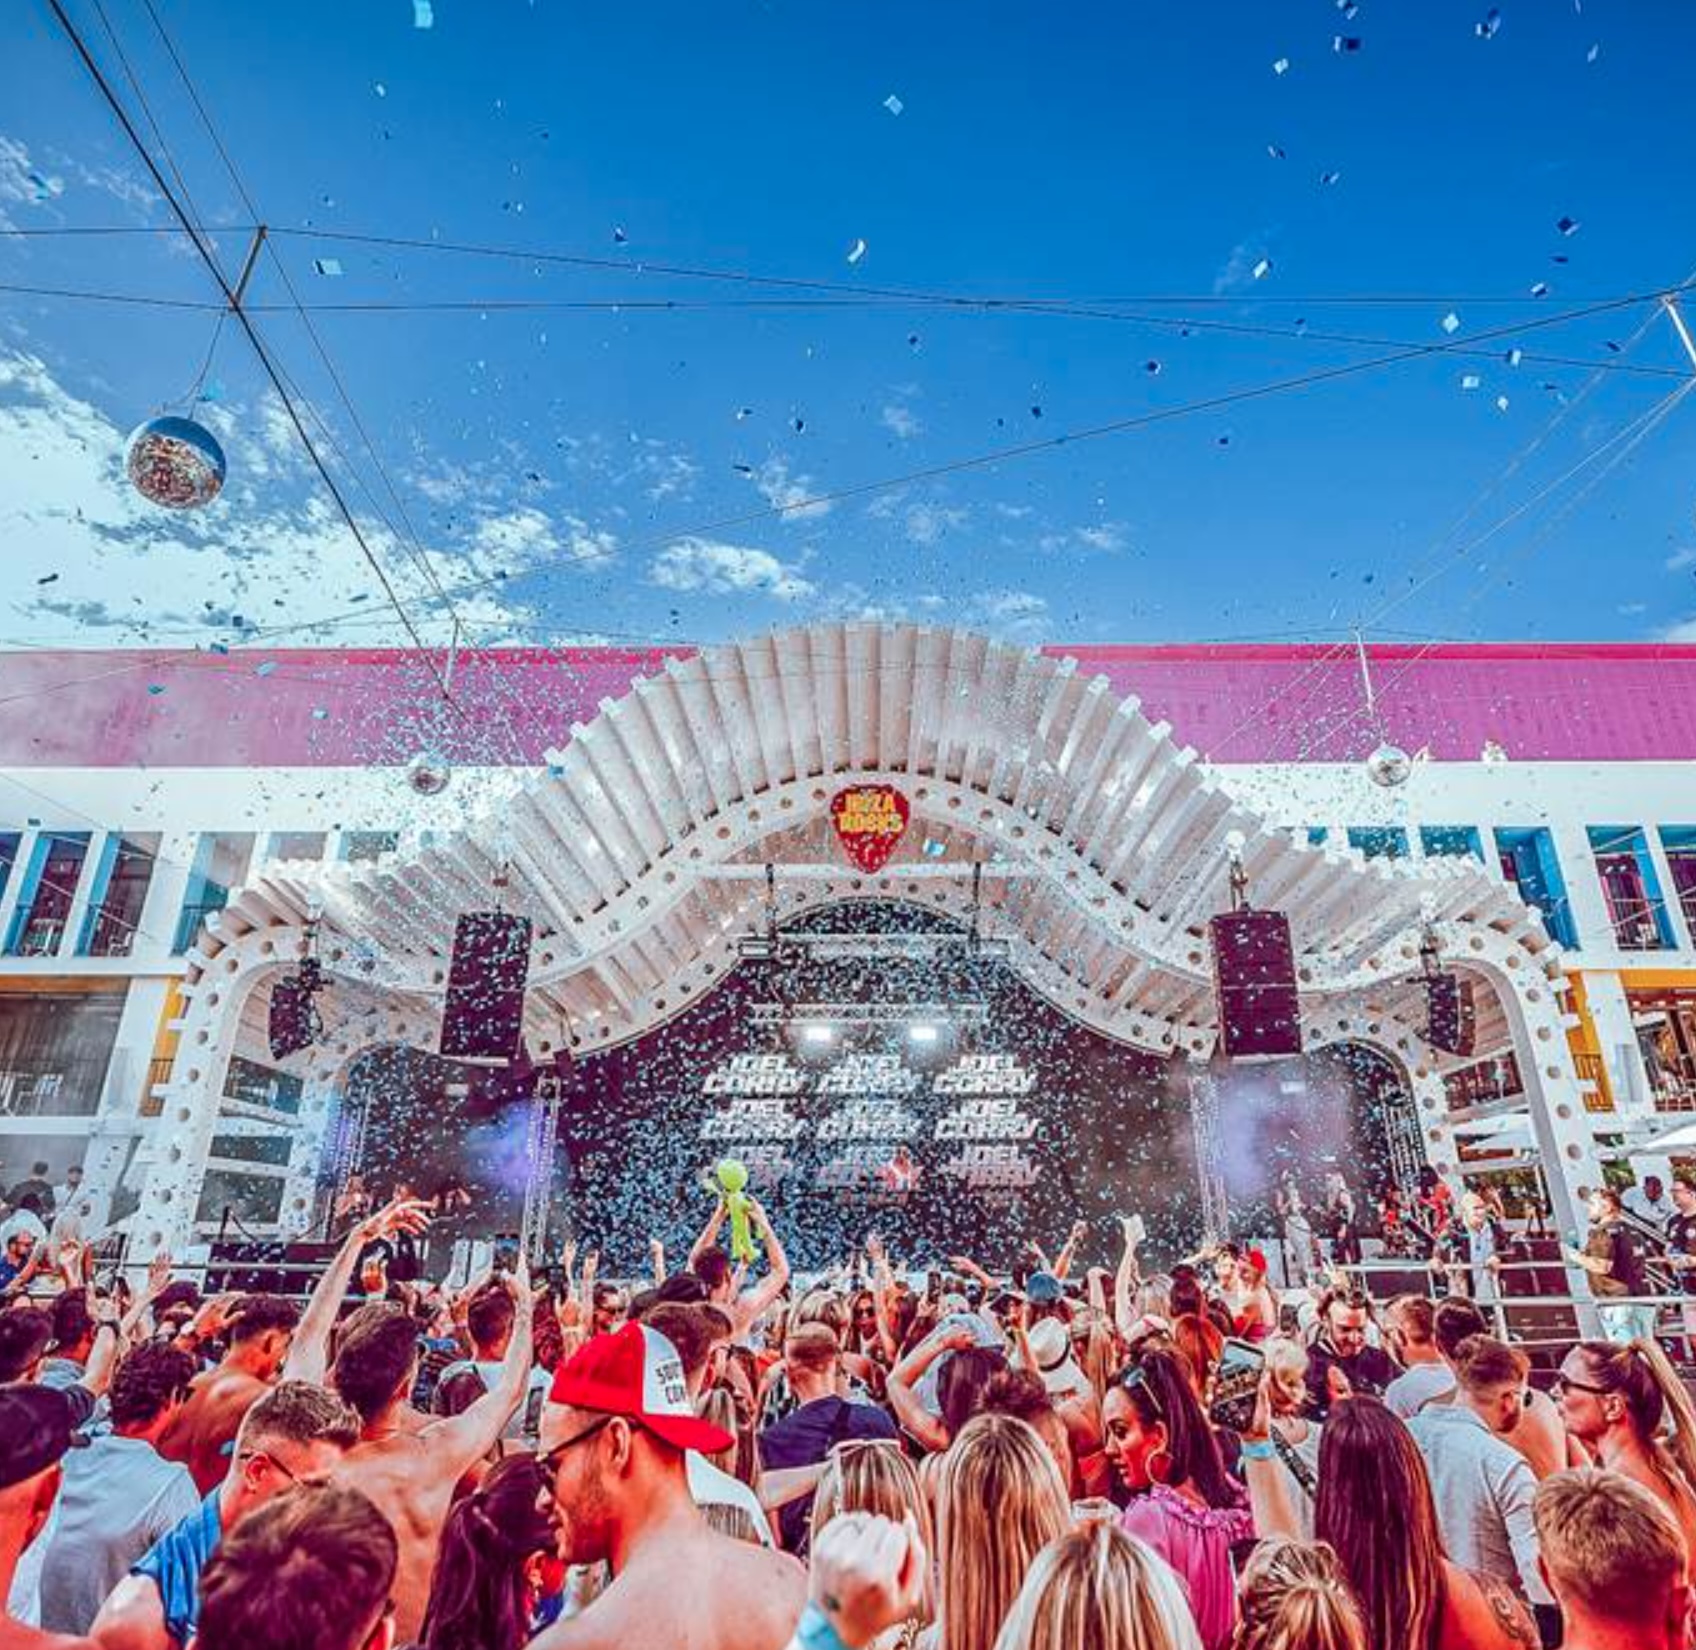 Enjoy the greatest DJs at party events in Ibiza, Magaluf and other hotspots